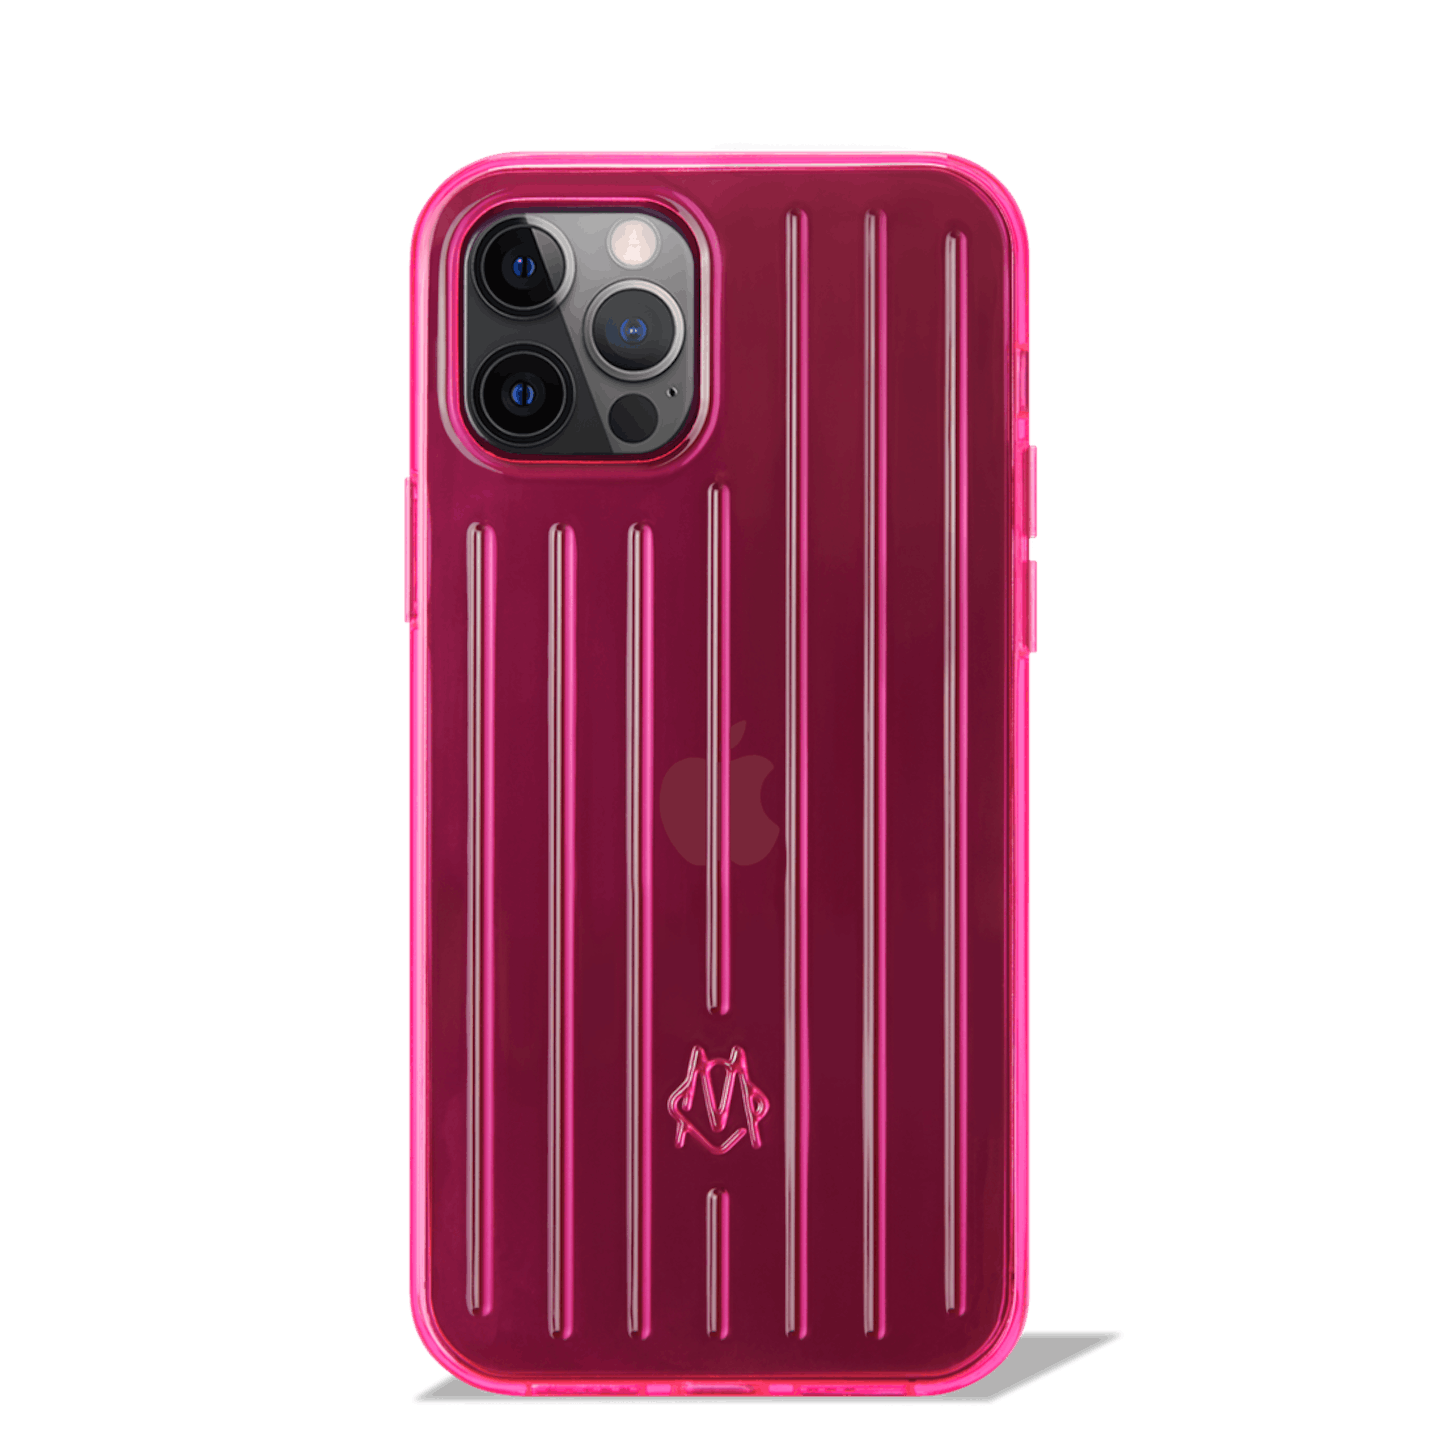 Rimowa, Neon Pink Case For iPhone 12 & 12 Pro, 75